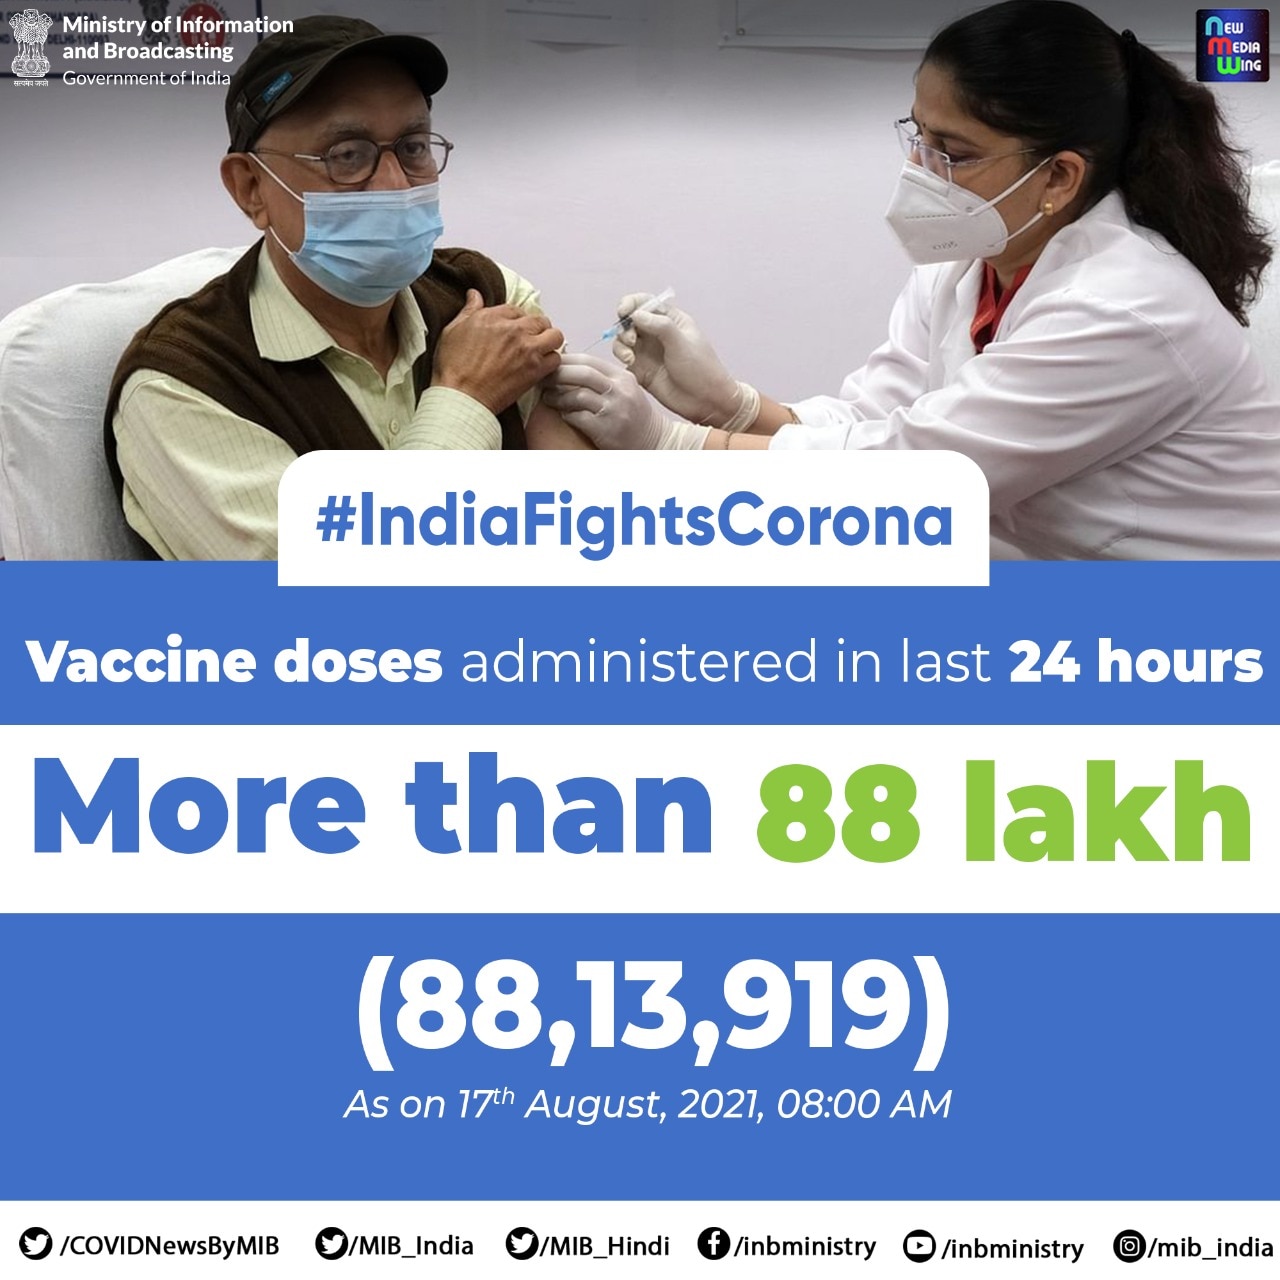 Covid Vaccination: India Sets New Inoculation Record, Over 88 Lakh Vaccinated In Single Day